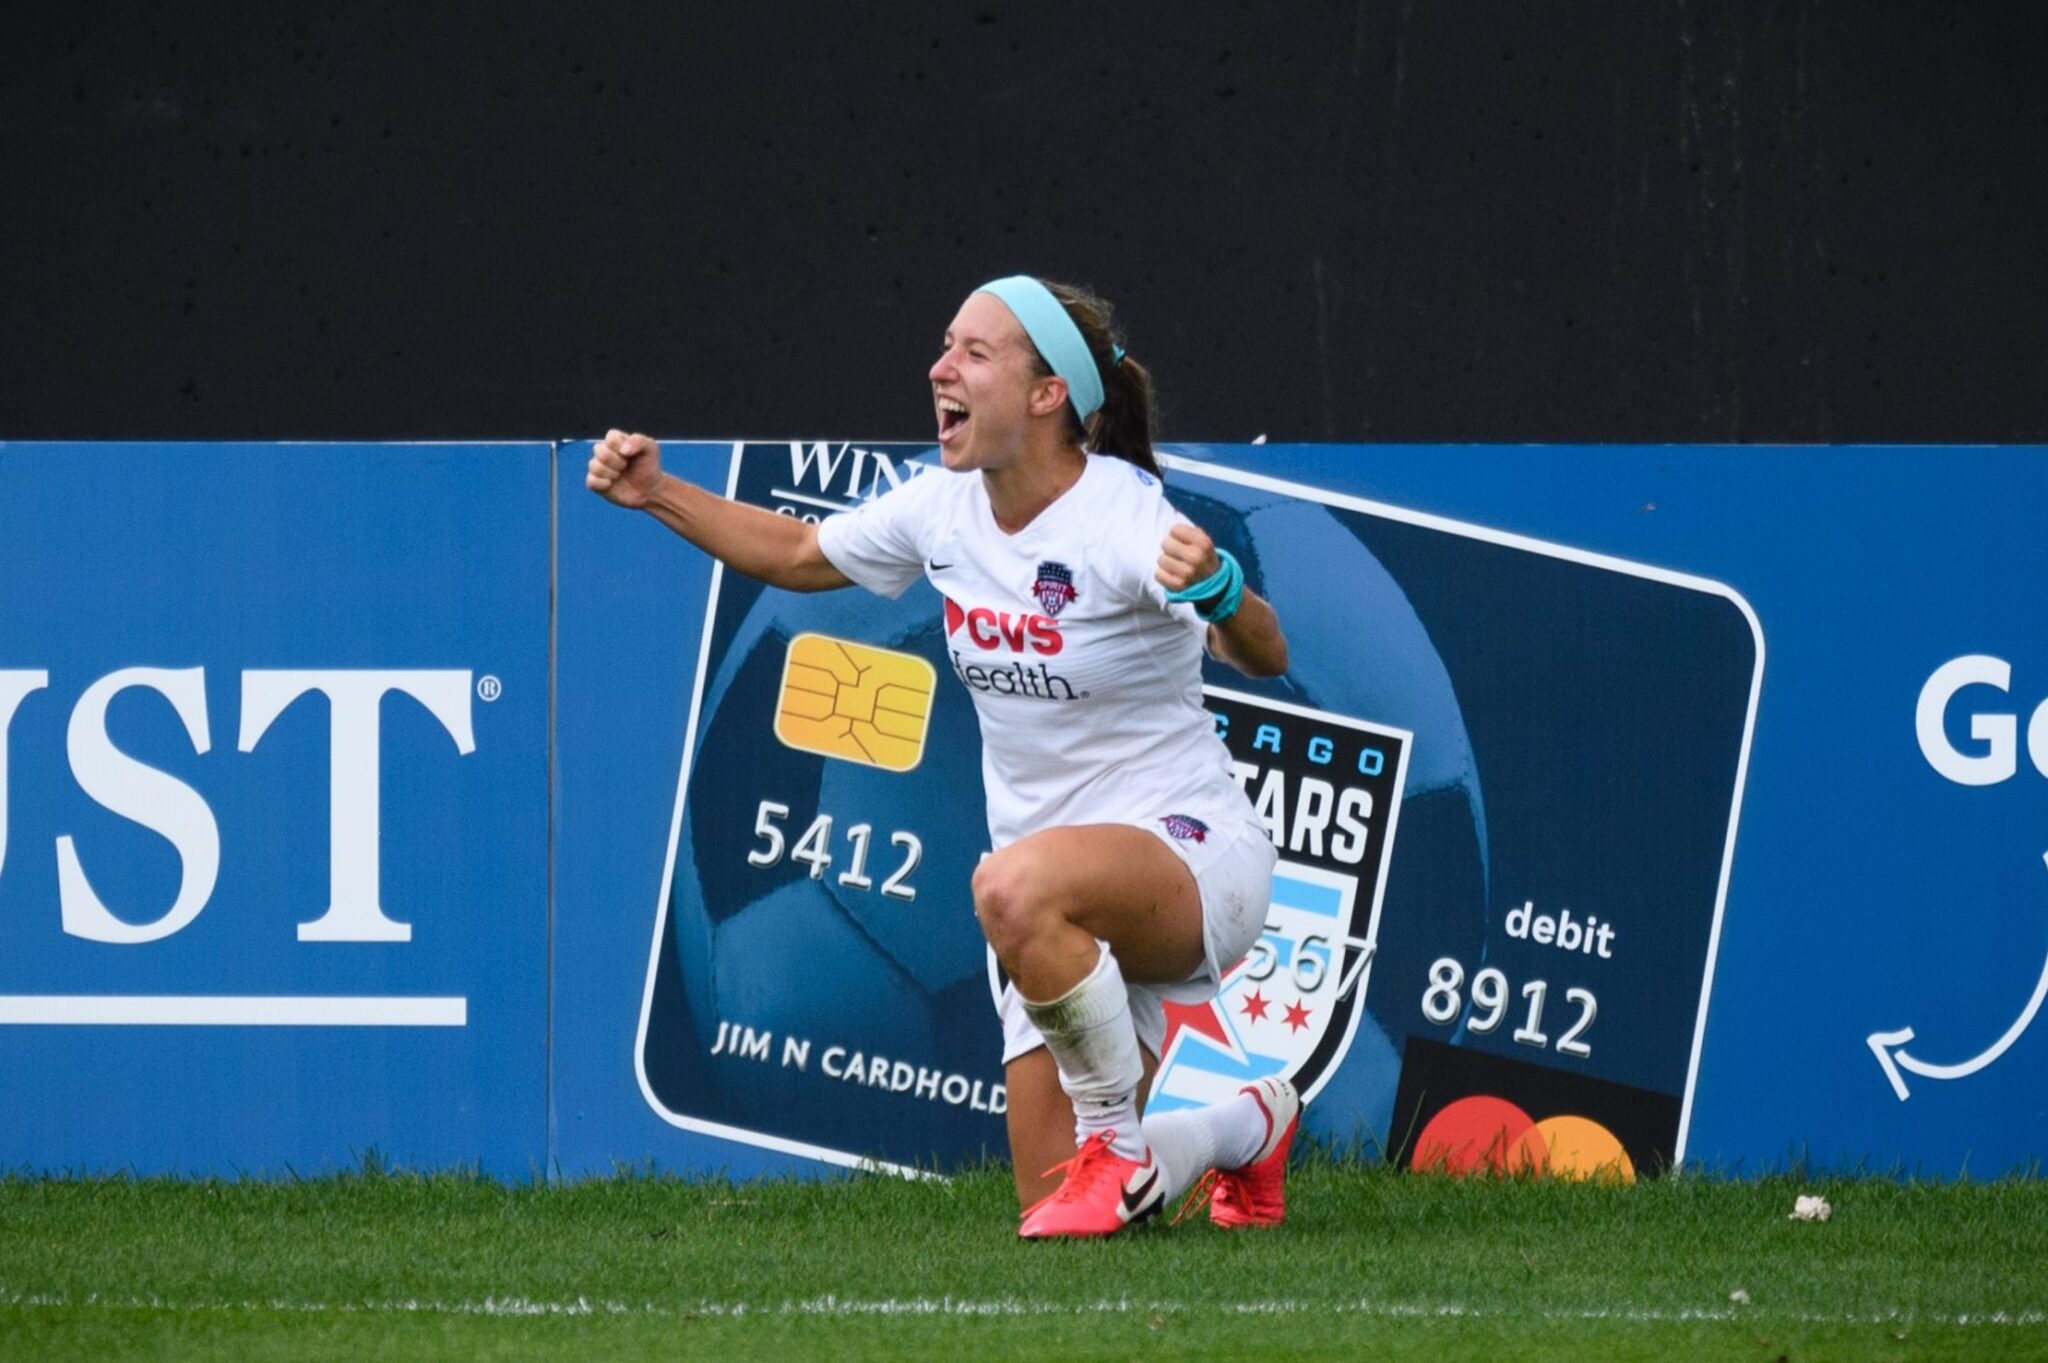 “They’re Battling Till the End” late goals define Spirit’s fight in Fall Series Featured Image